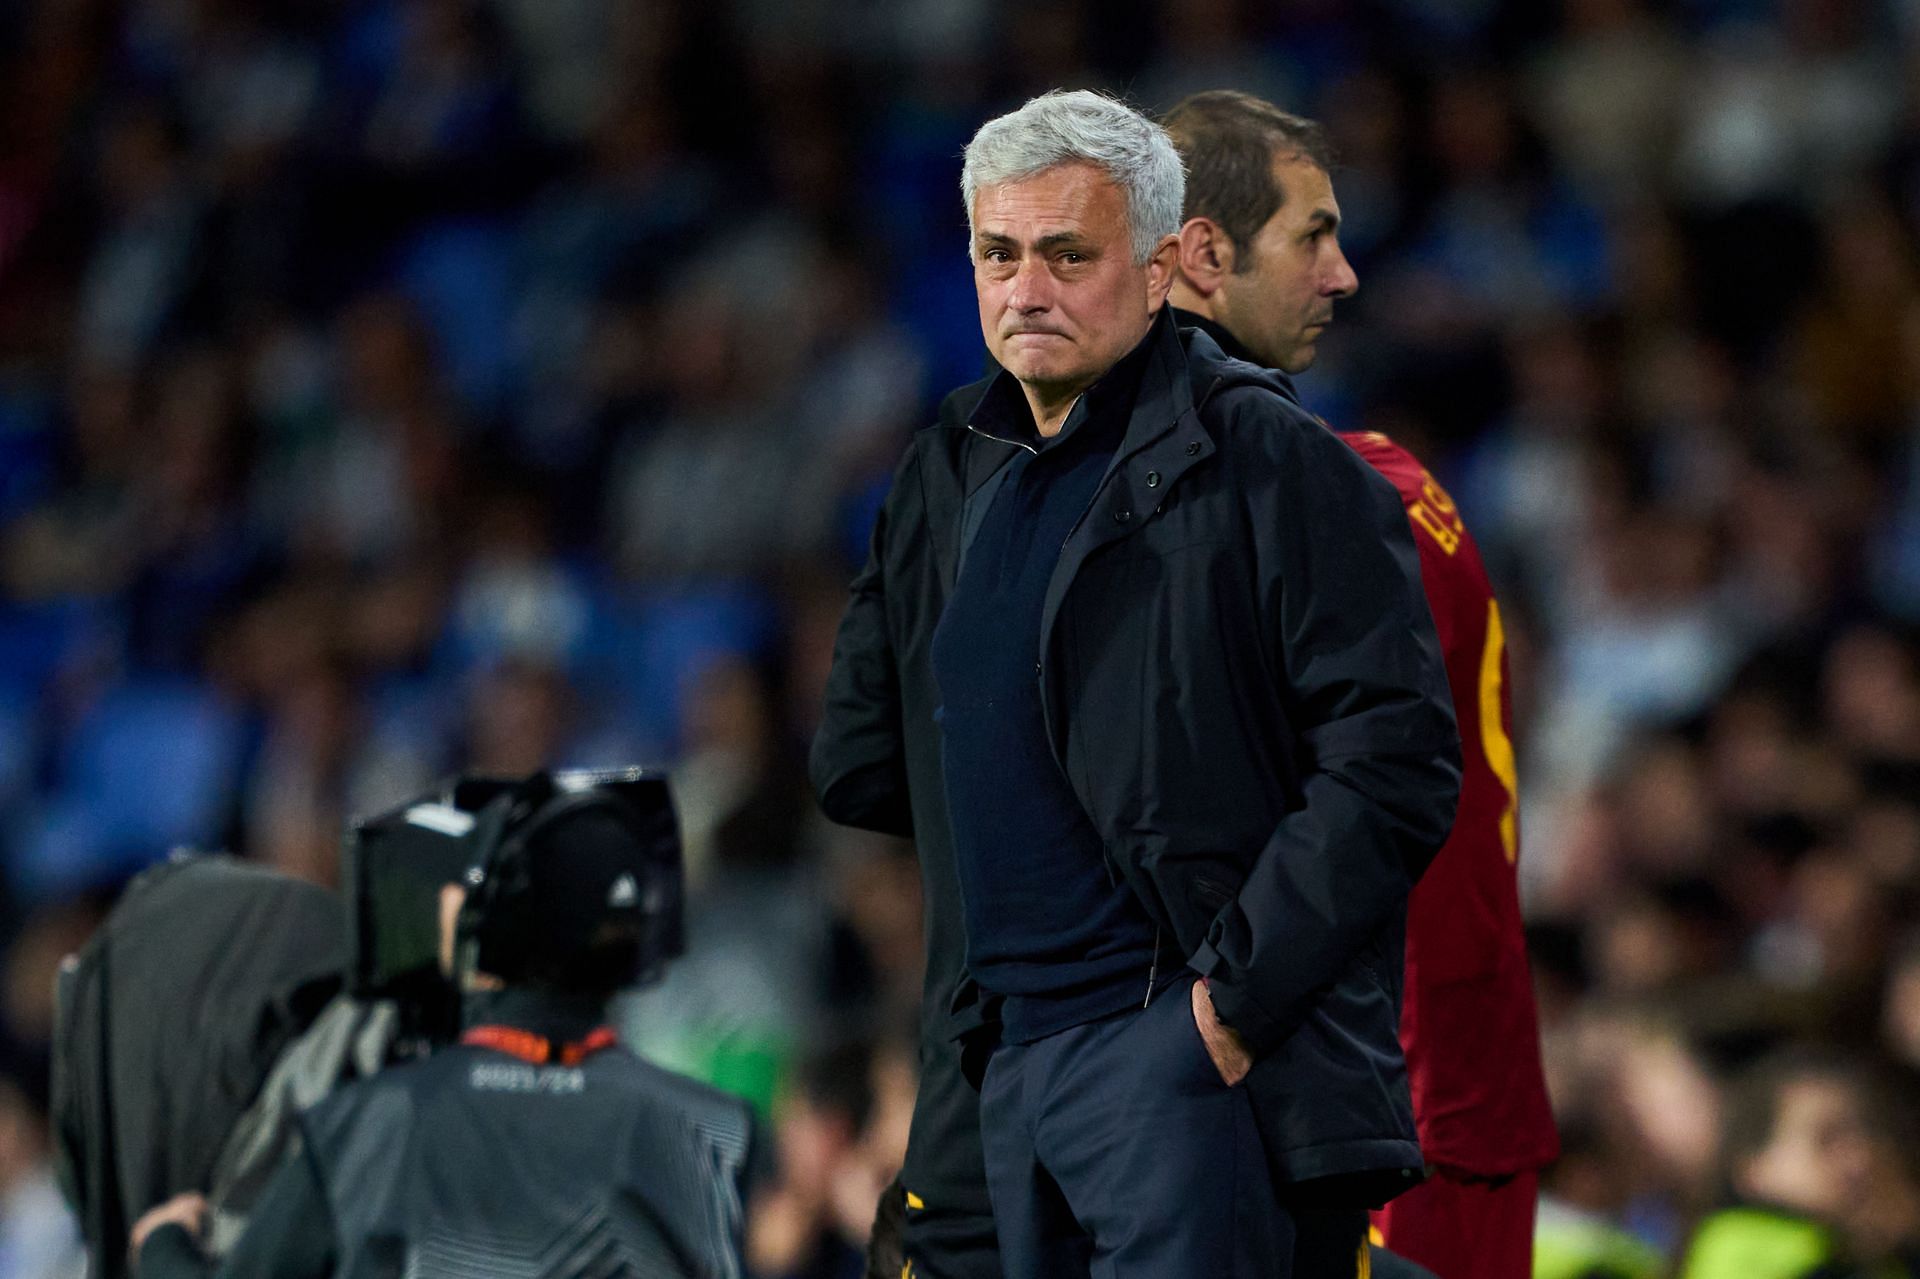 Jose Mourinho is among the candidates linked to the hot seat at the Parc des Princes.